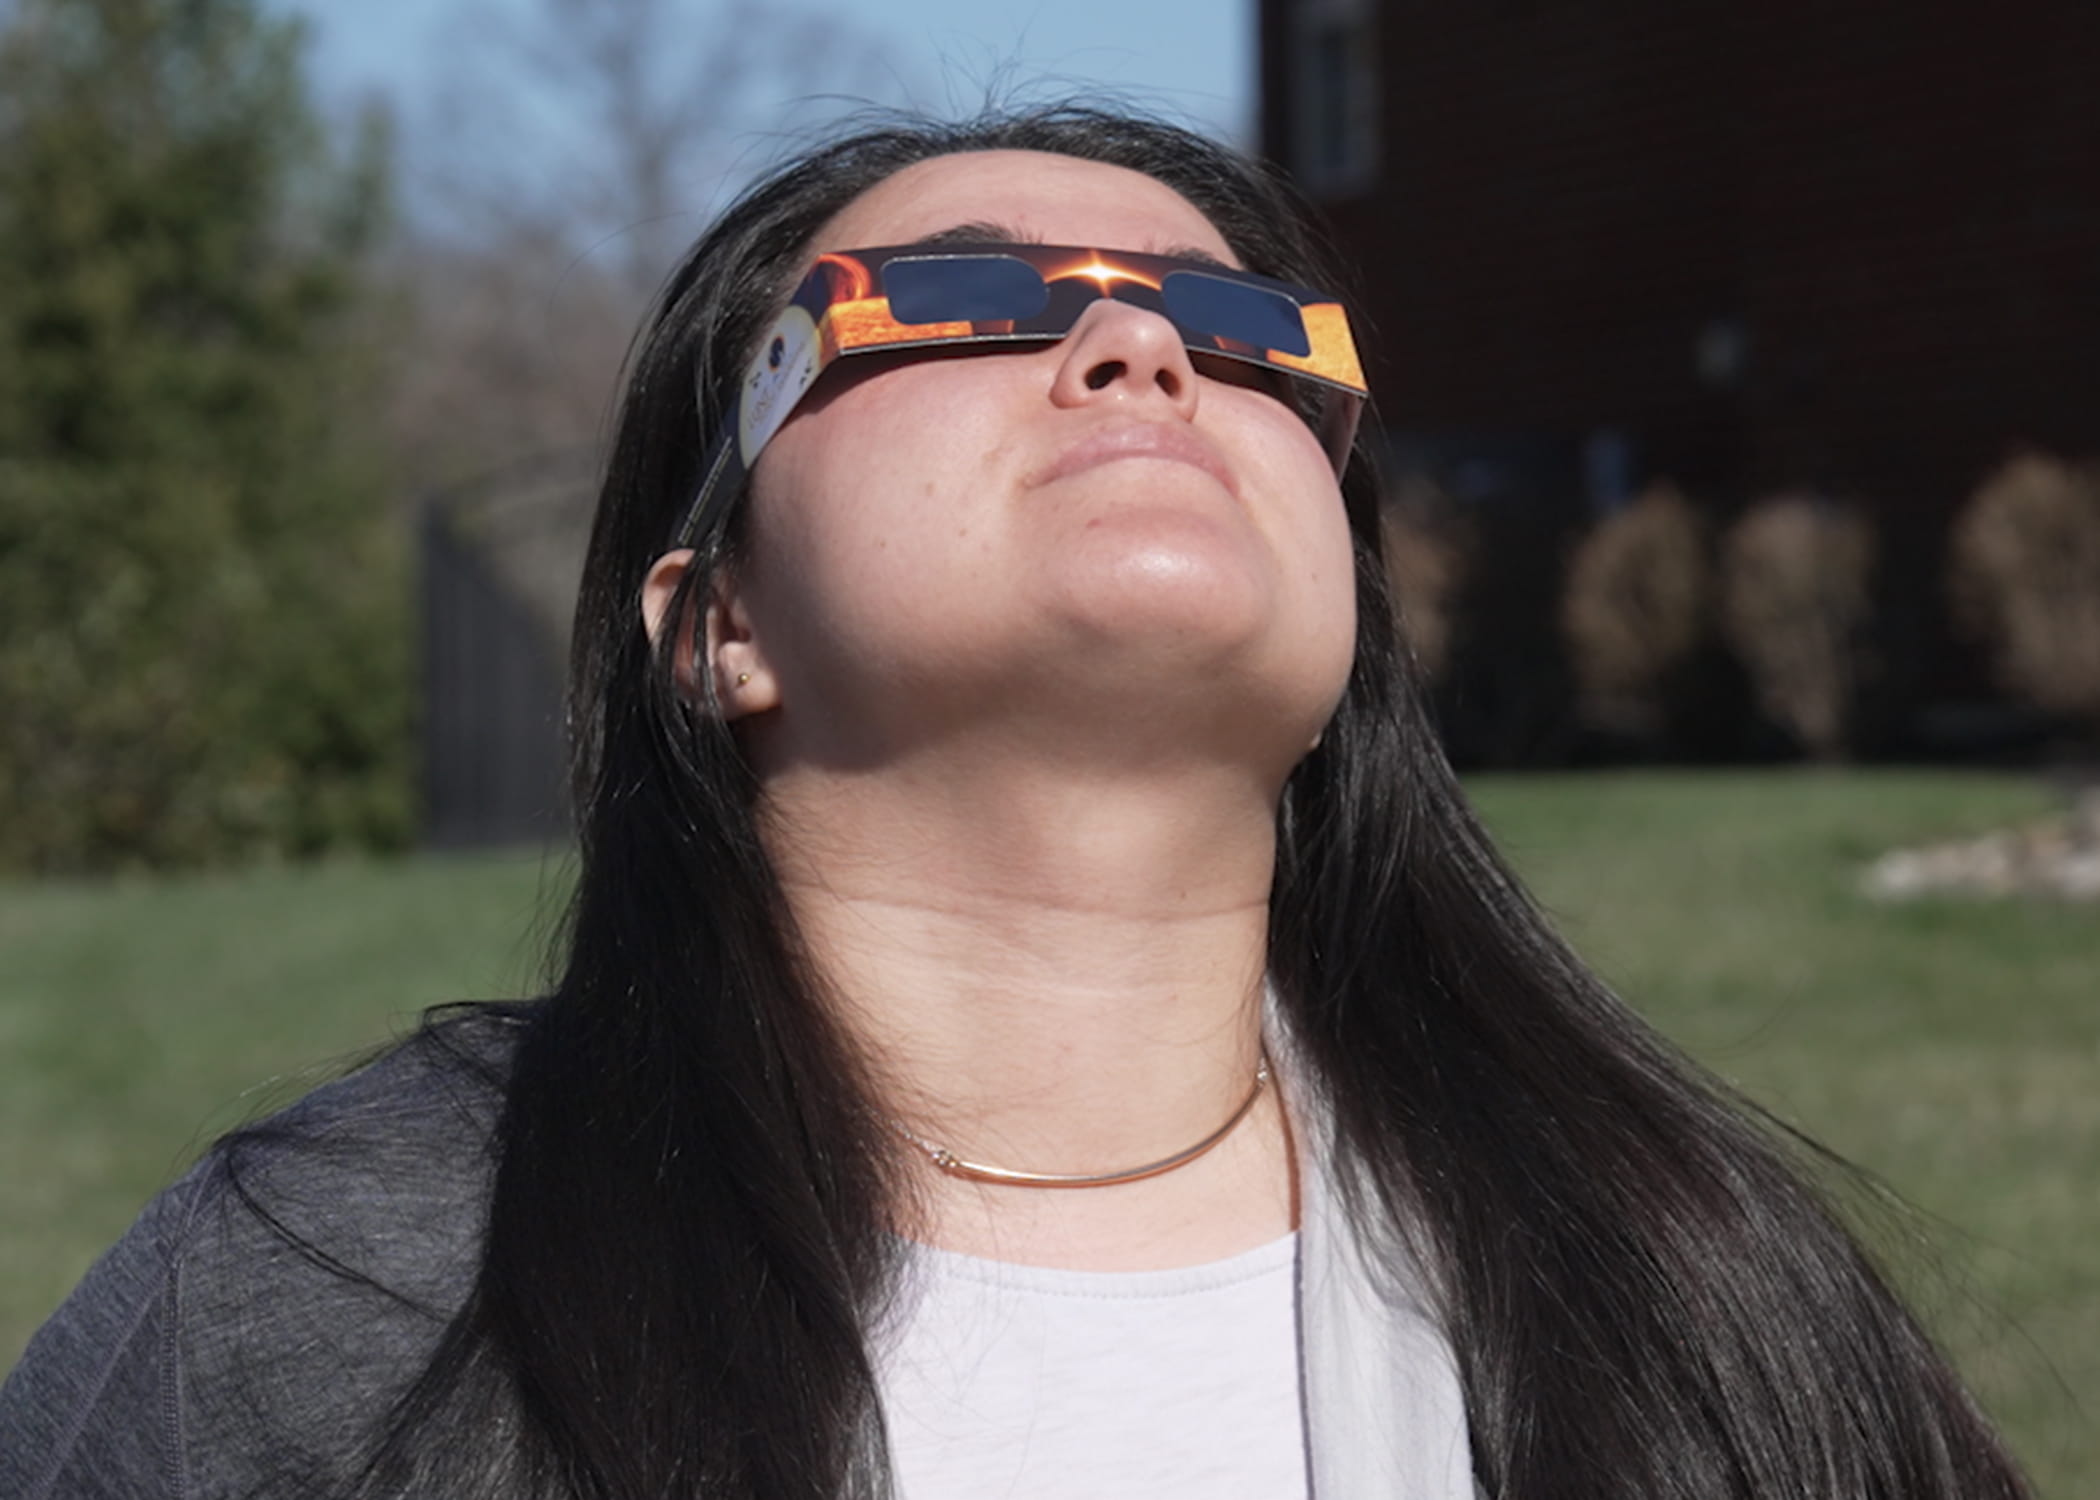 Woman looks at sun while wearing solar eclipse glasses